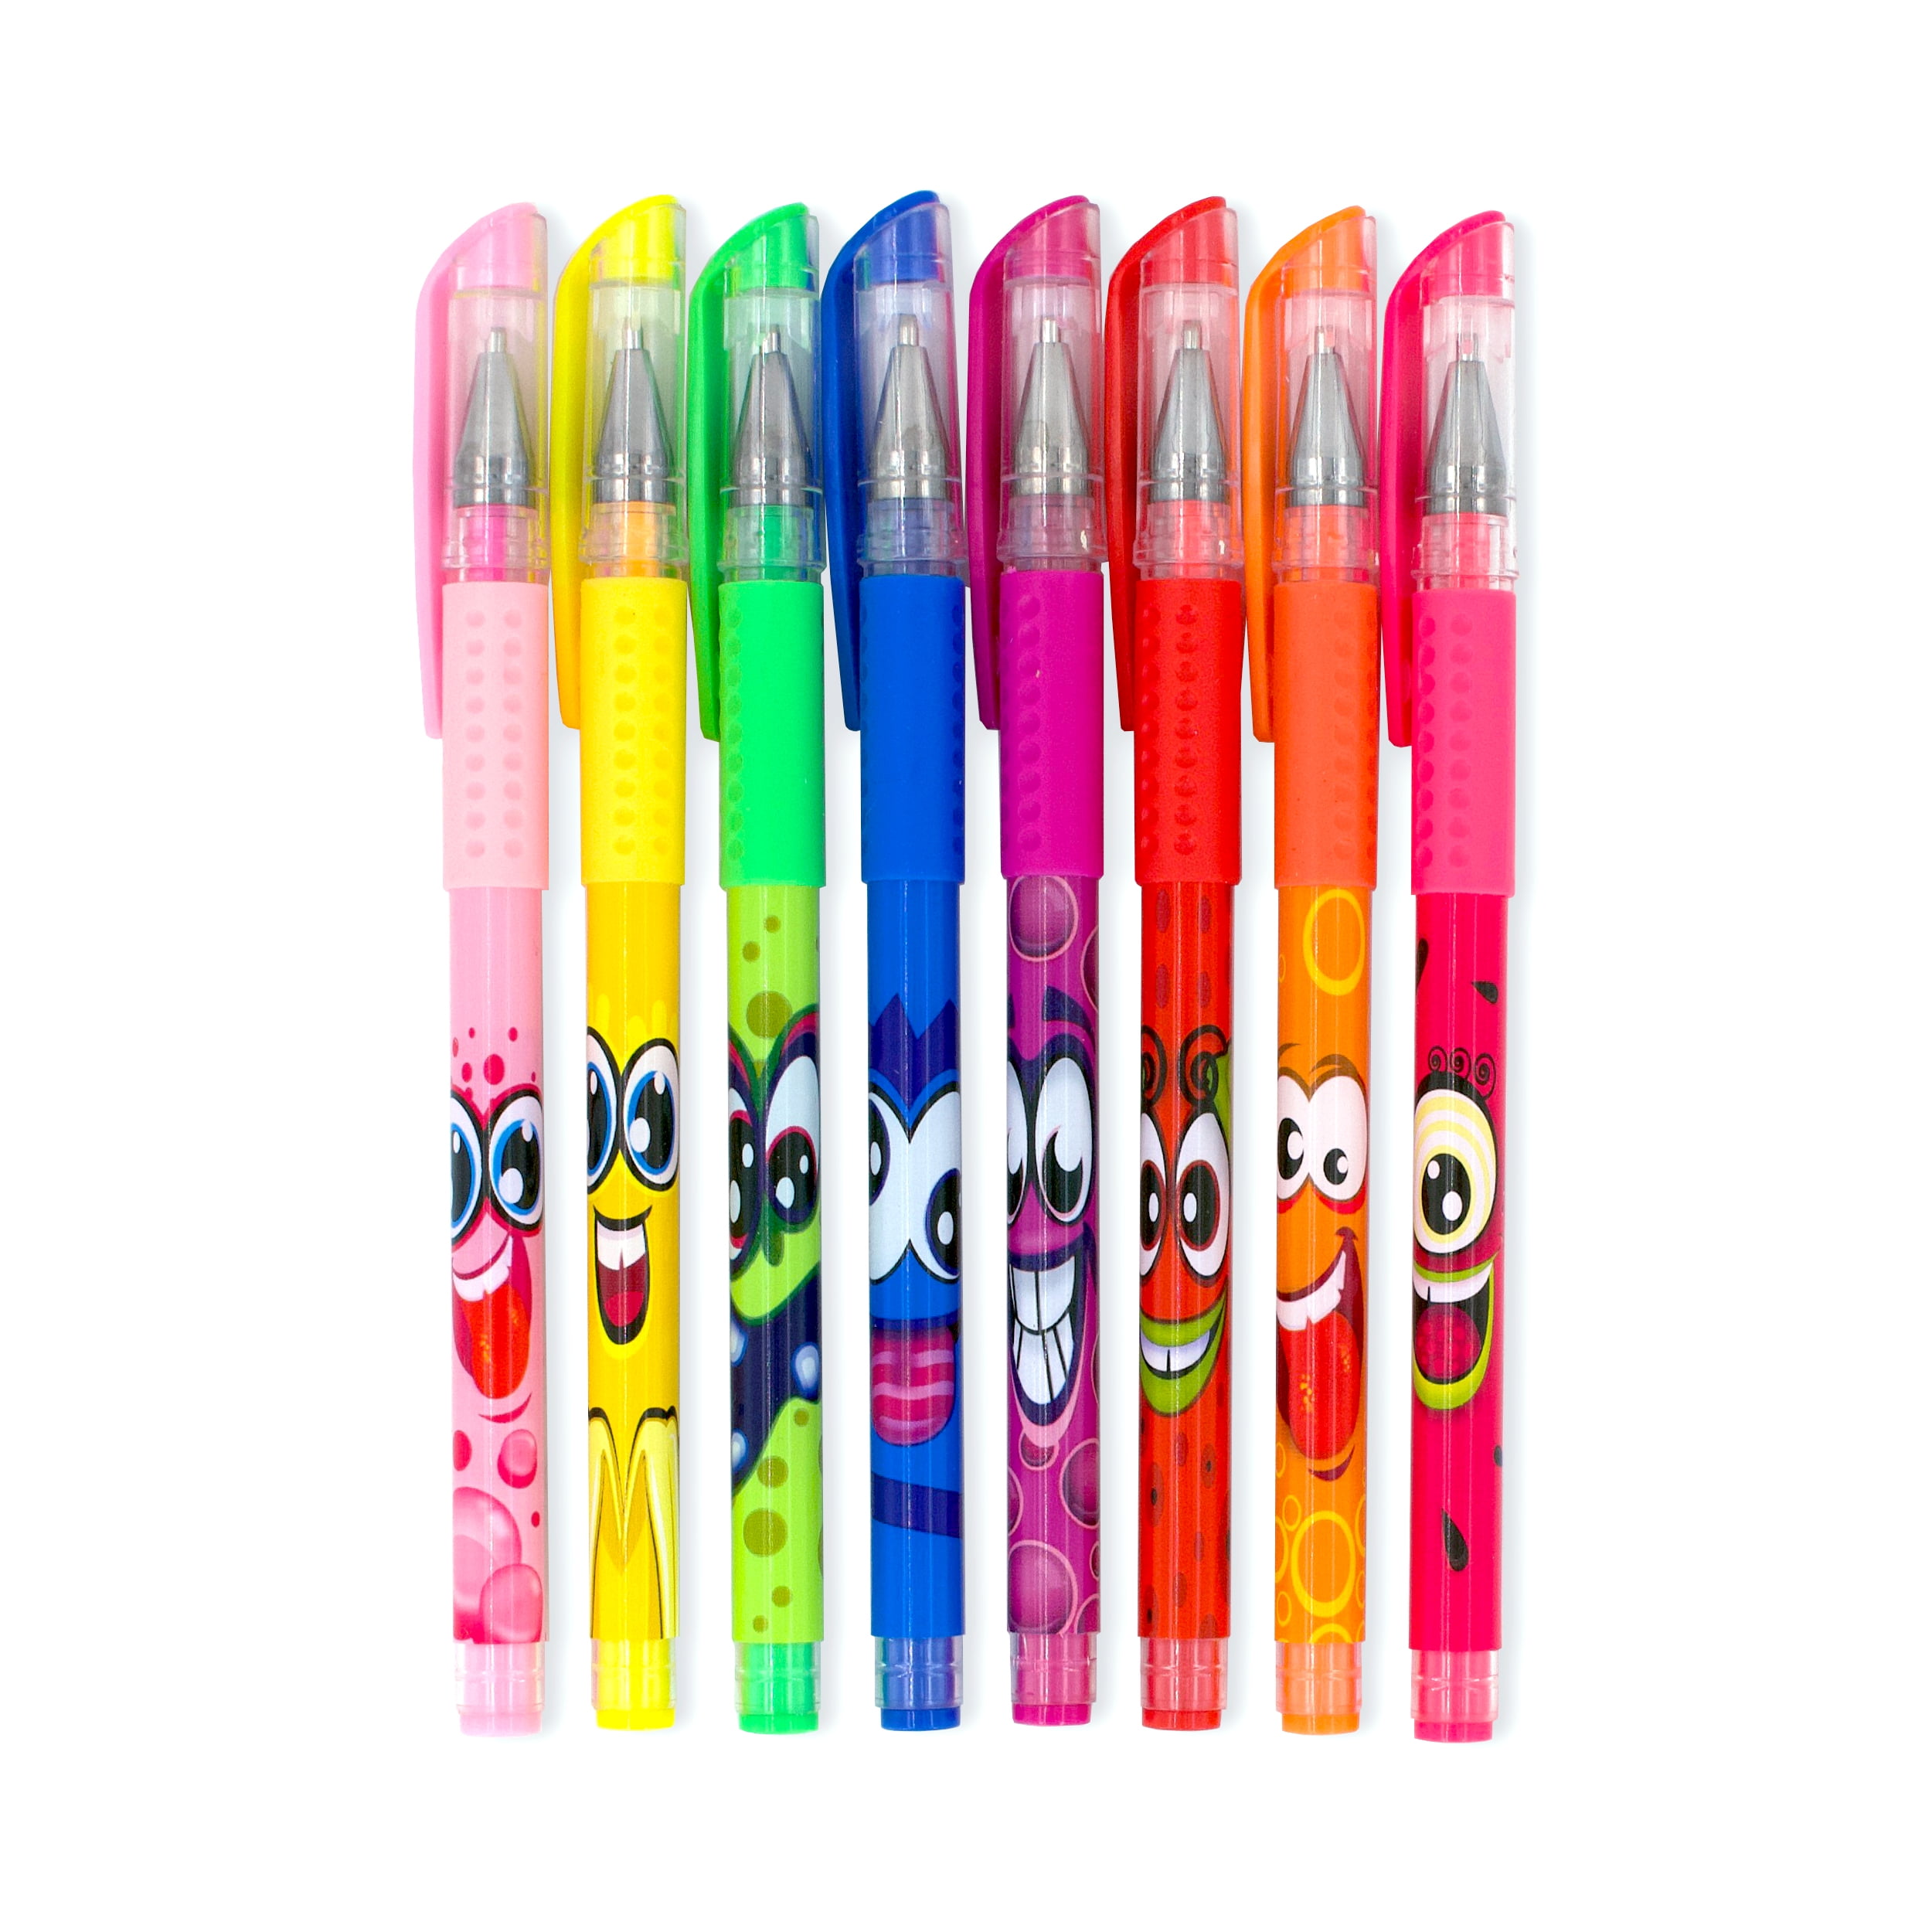 Scentos Fruity Scented Gel Ink Pens for Ages 3+ - Assorted Colorful Pens  for Journaling & Drawing - Glitter 8 Pack